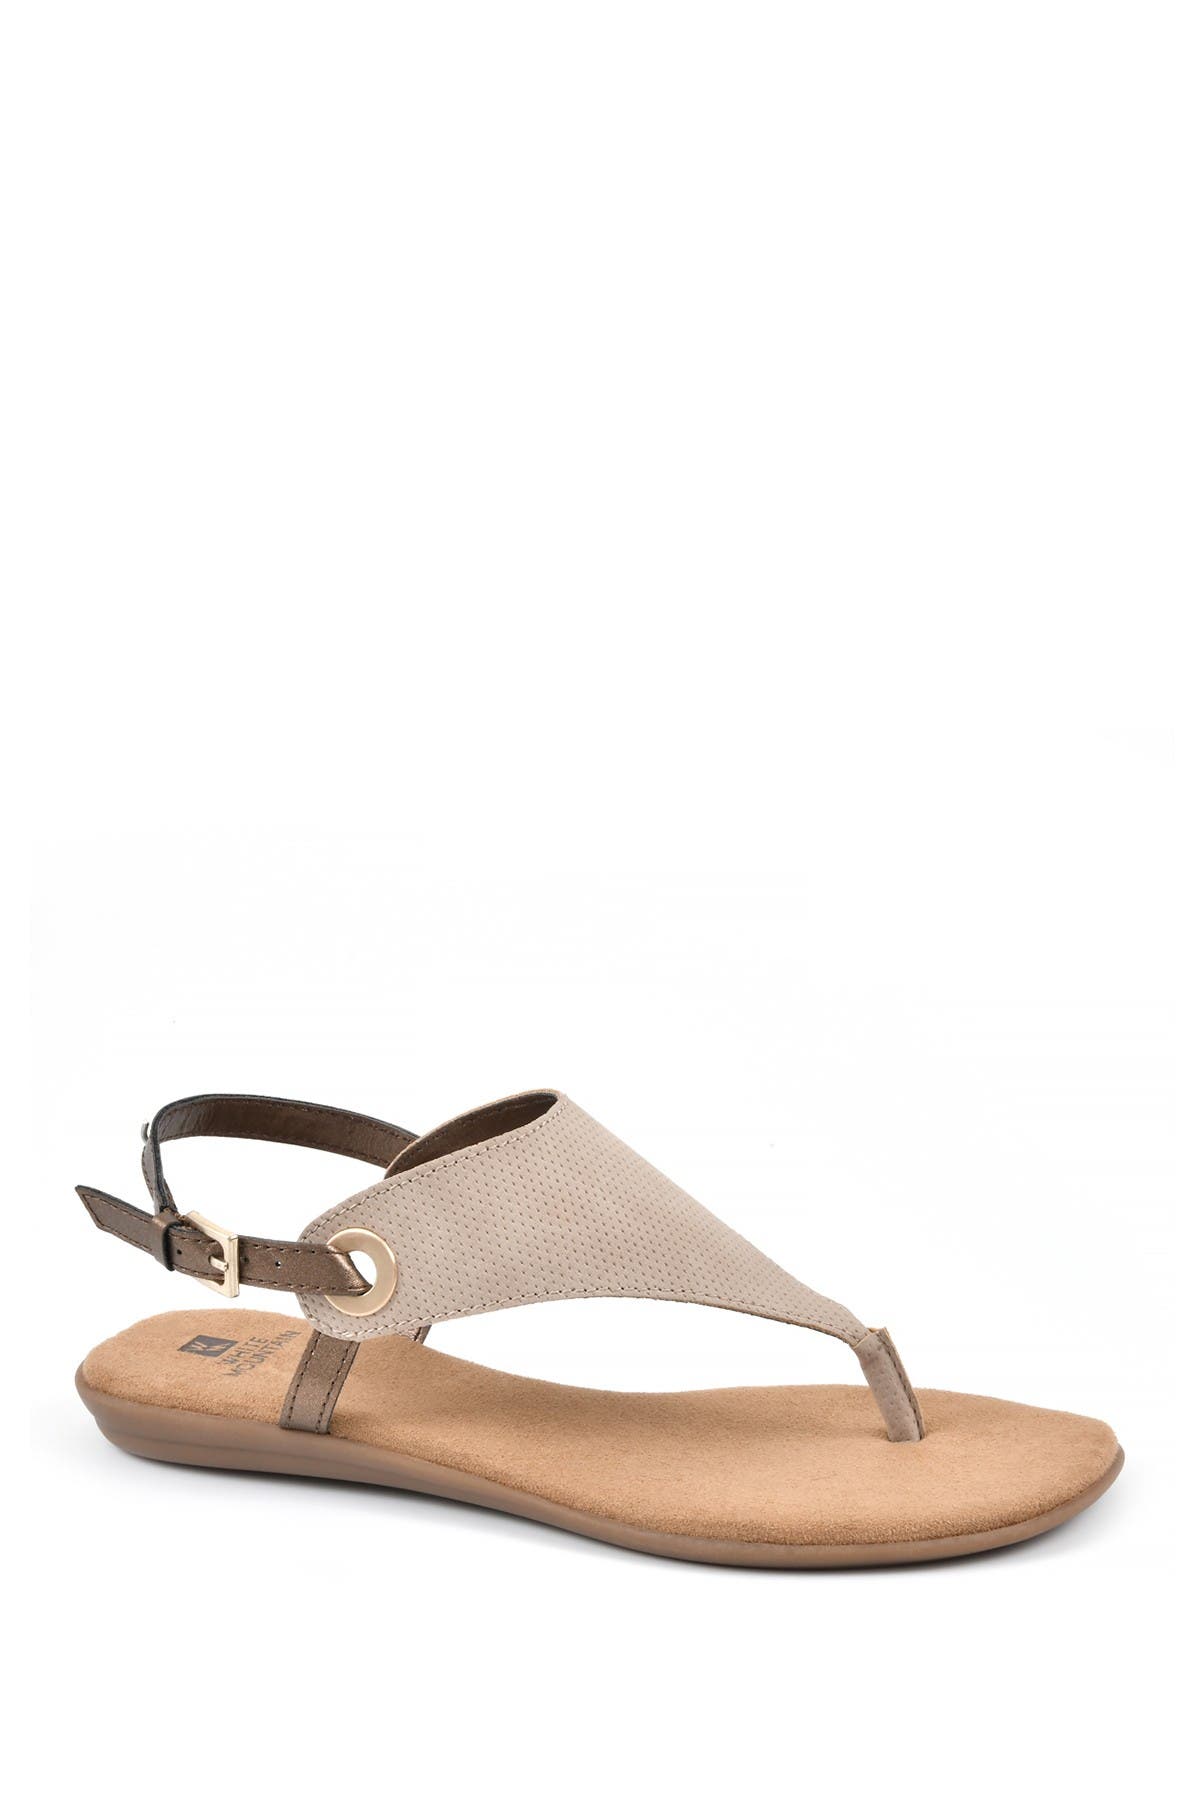 White Mountain Footwear London T-strap Sandal In Taupe / Hc Smooth